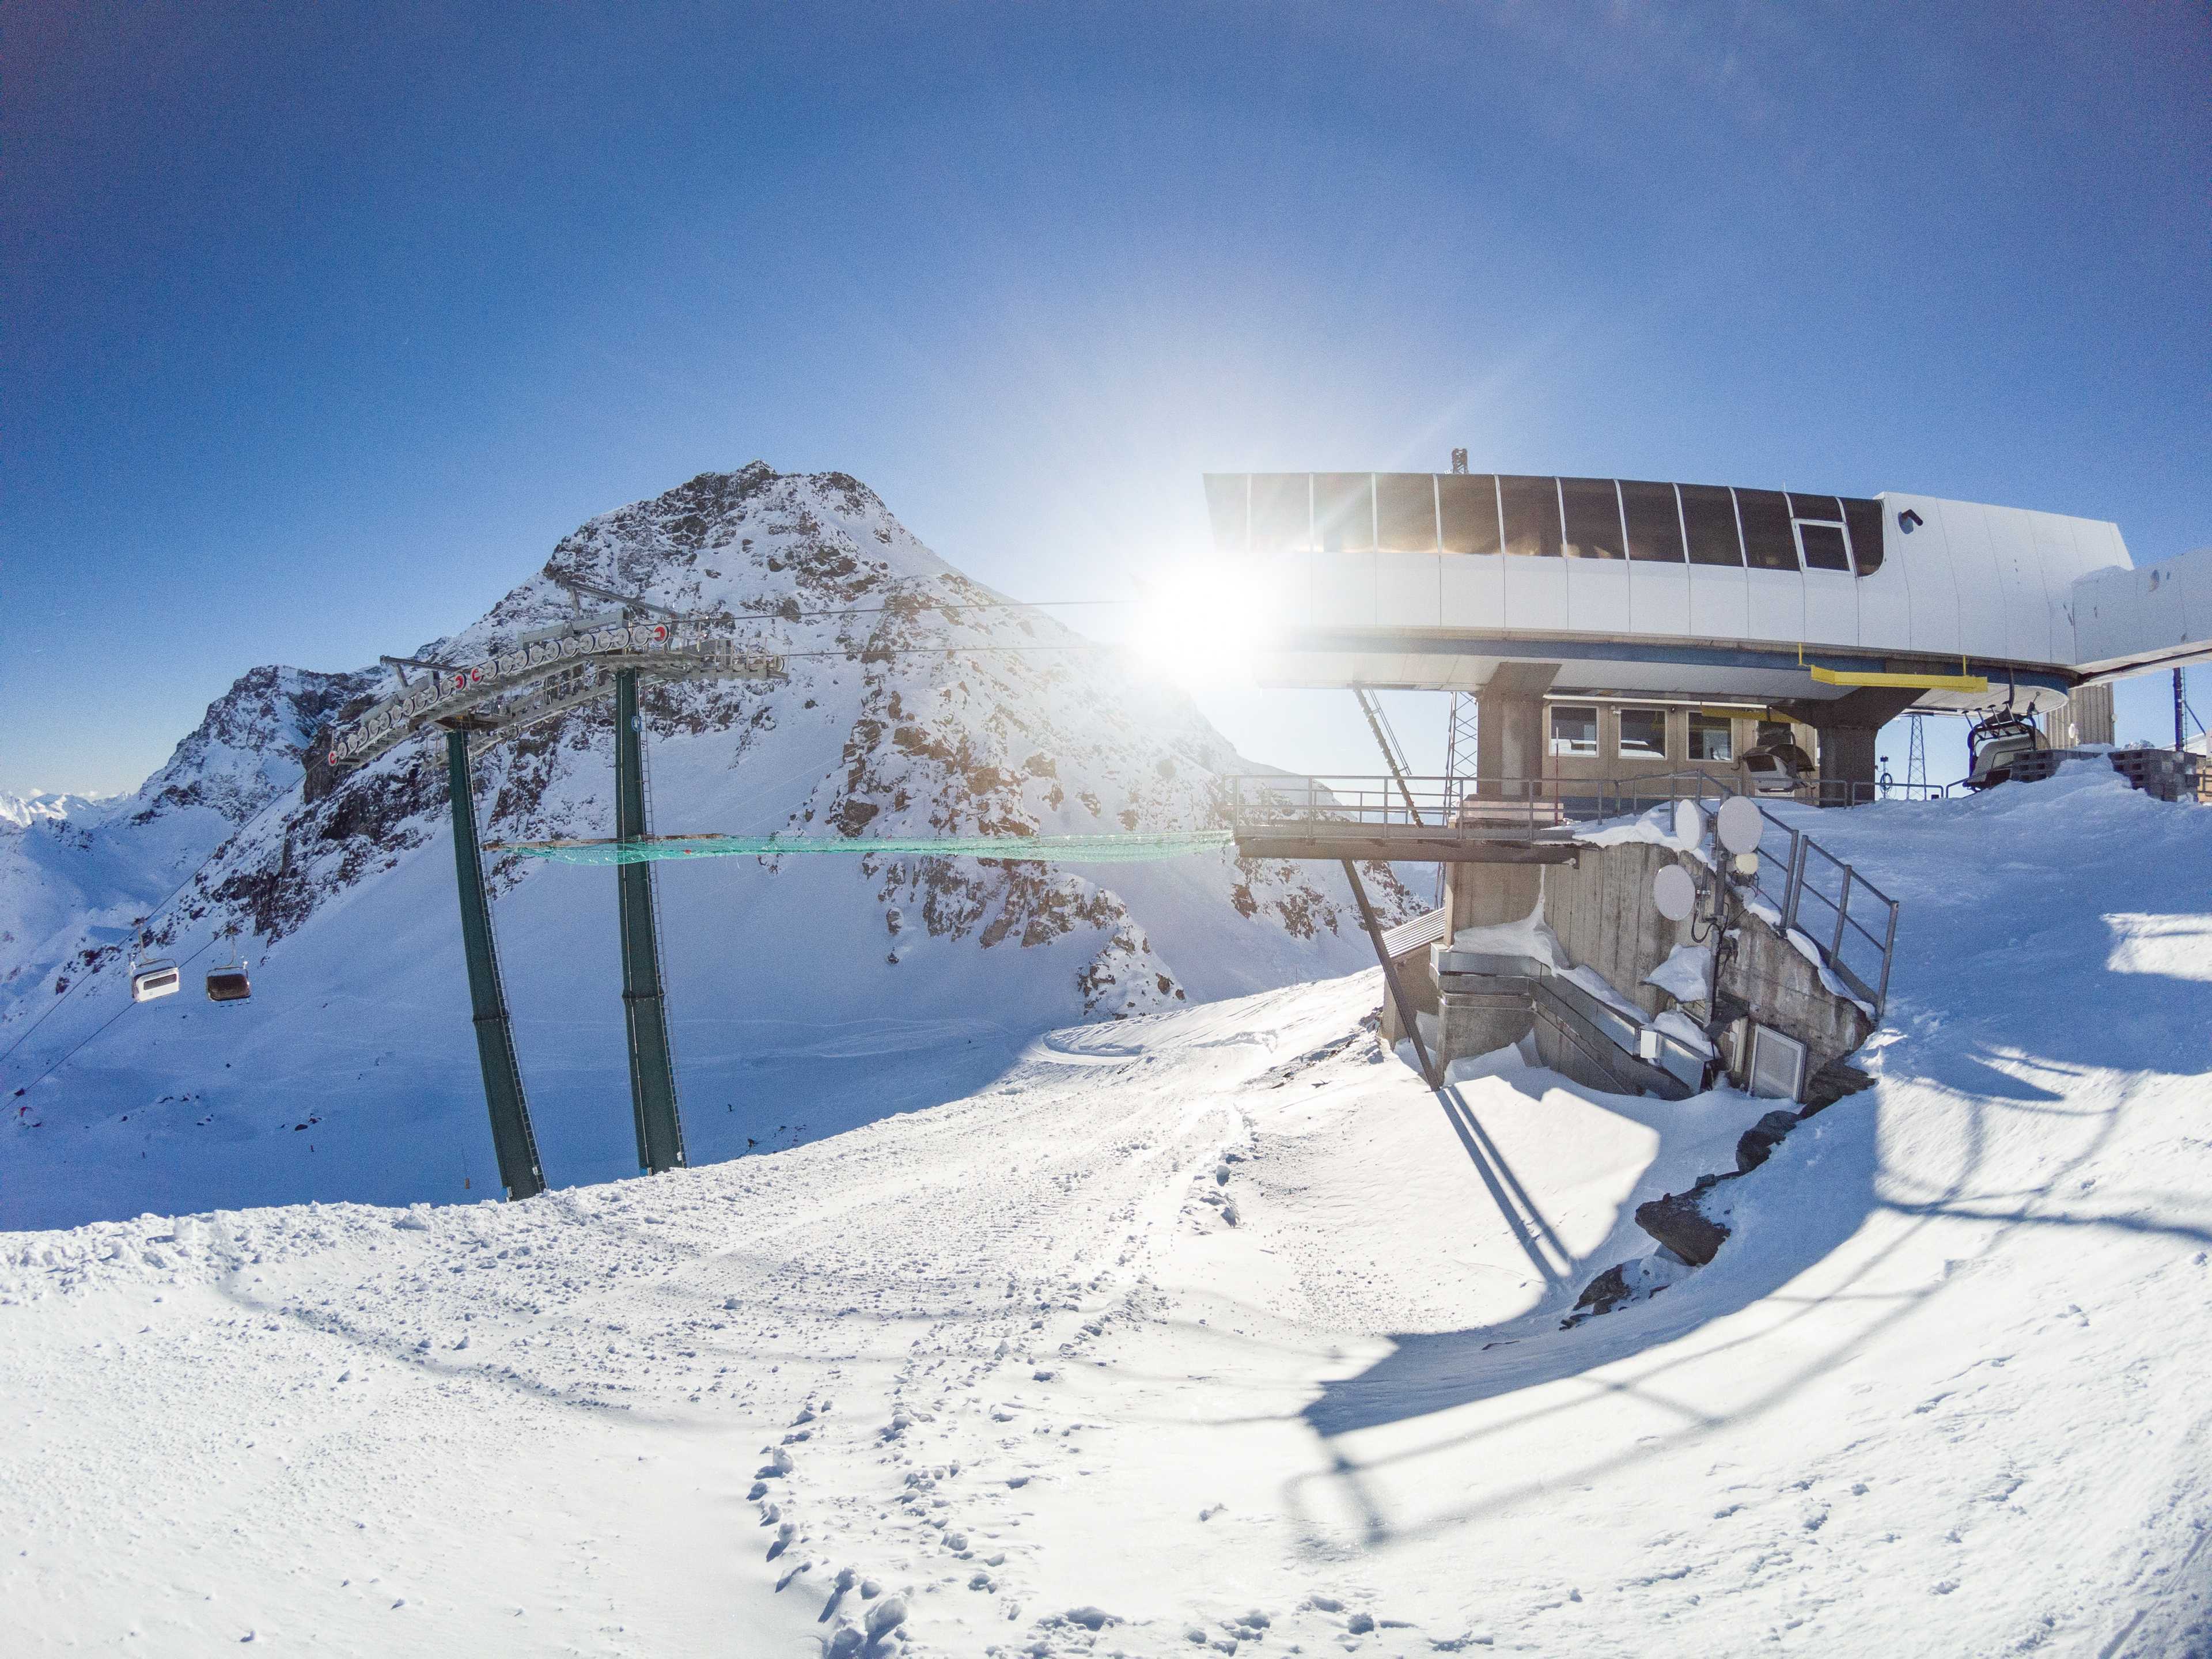 Sant'Anna-Colle Betta chairlift, Stafal